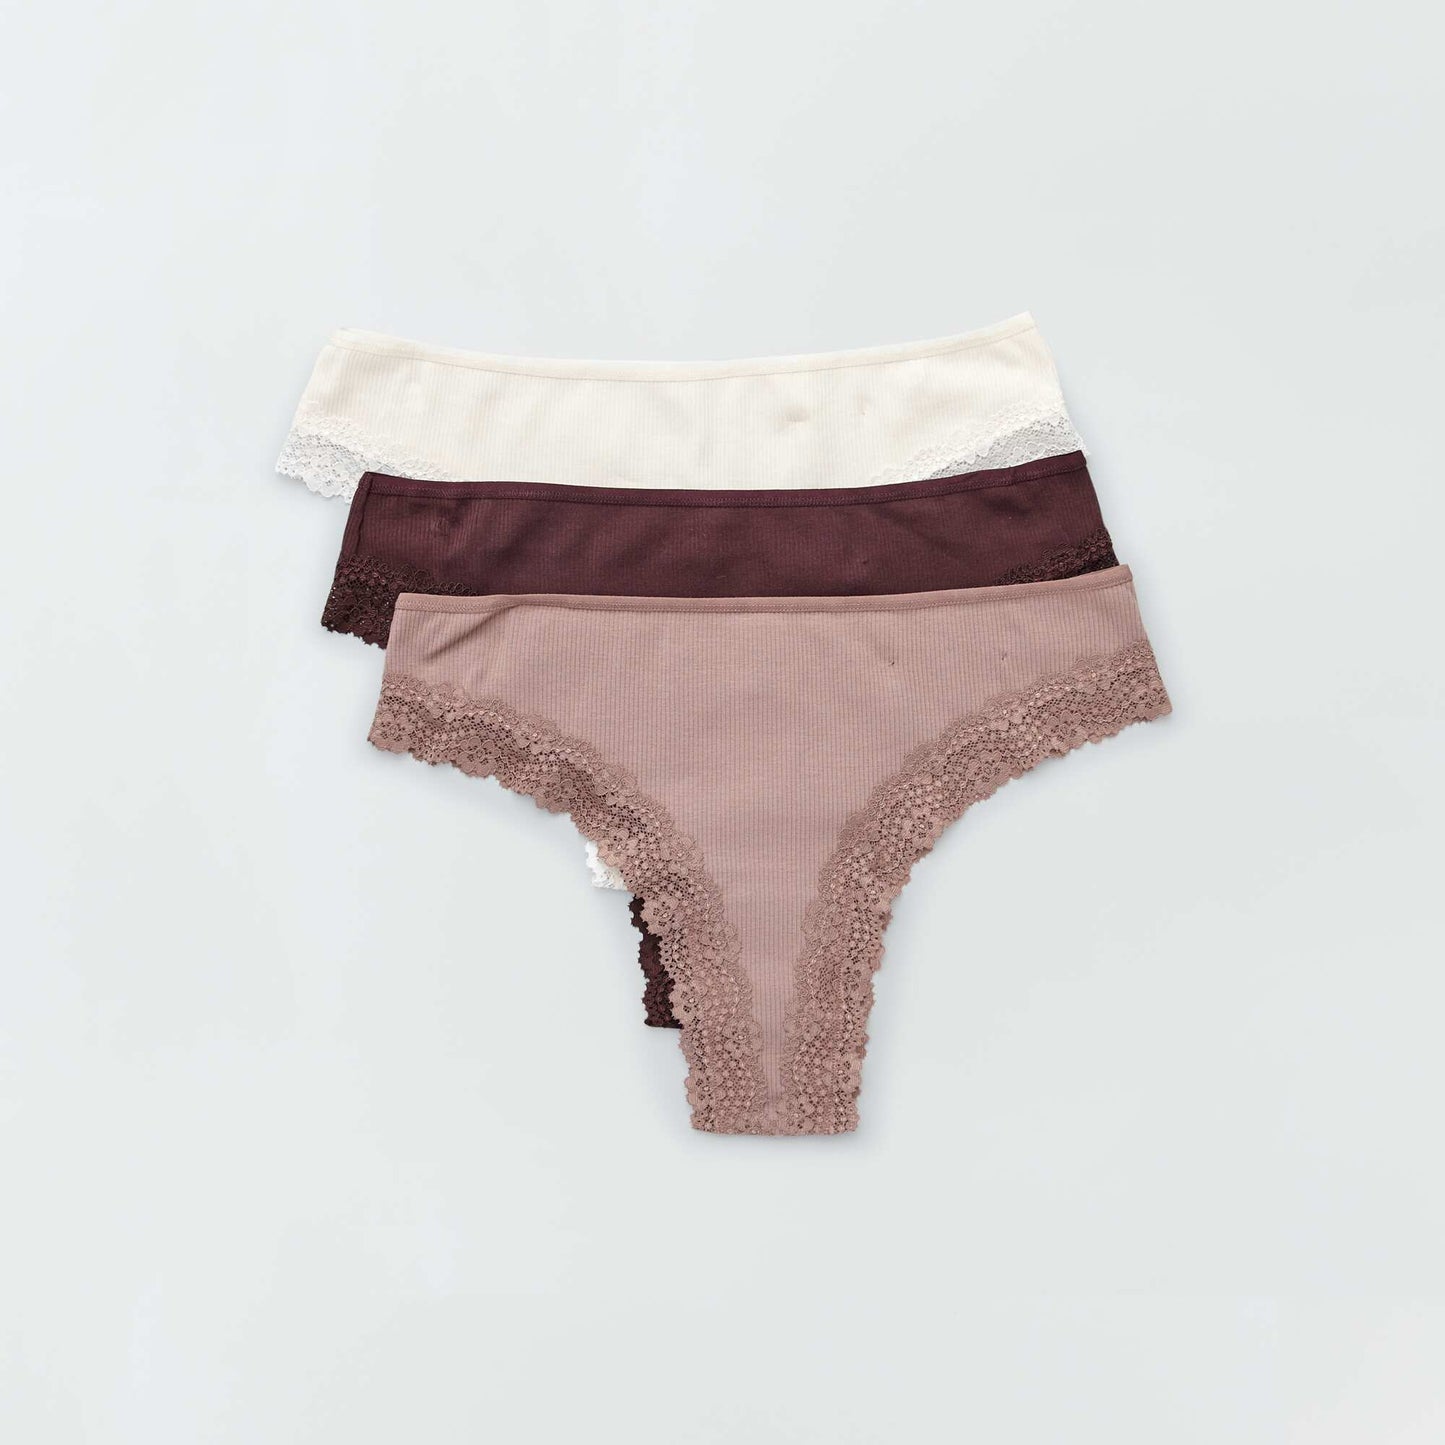 Pack of 3 ribbed knit tanga briefs prune browns